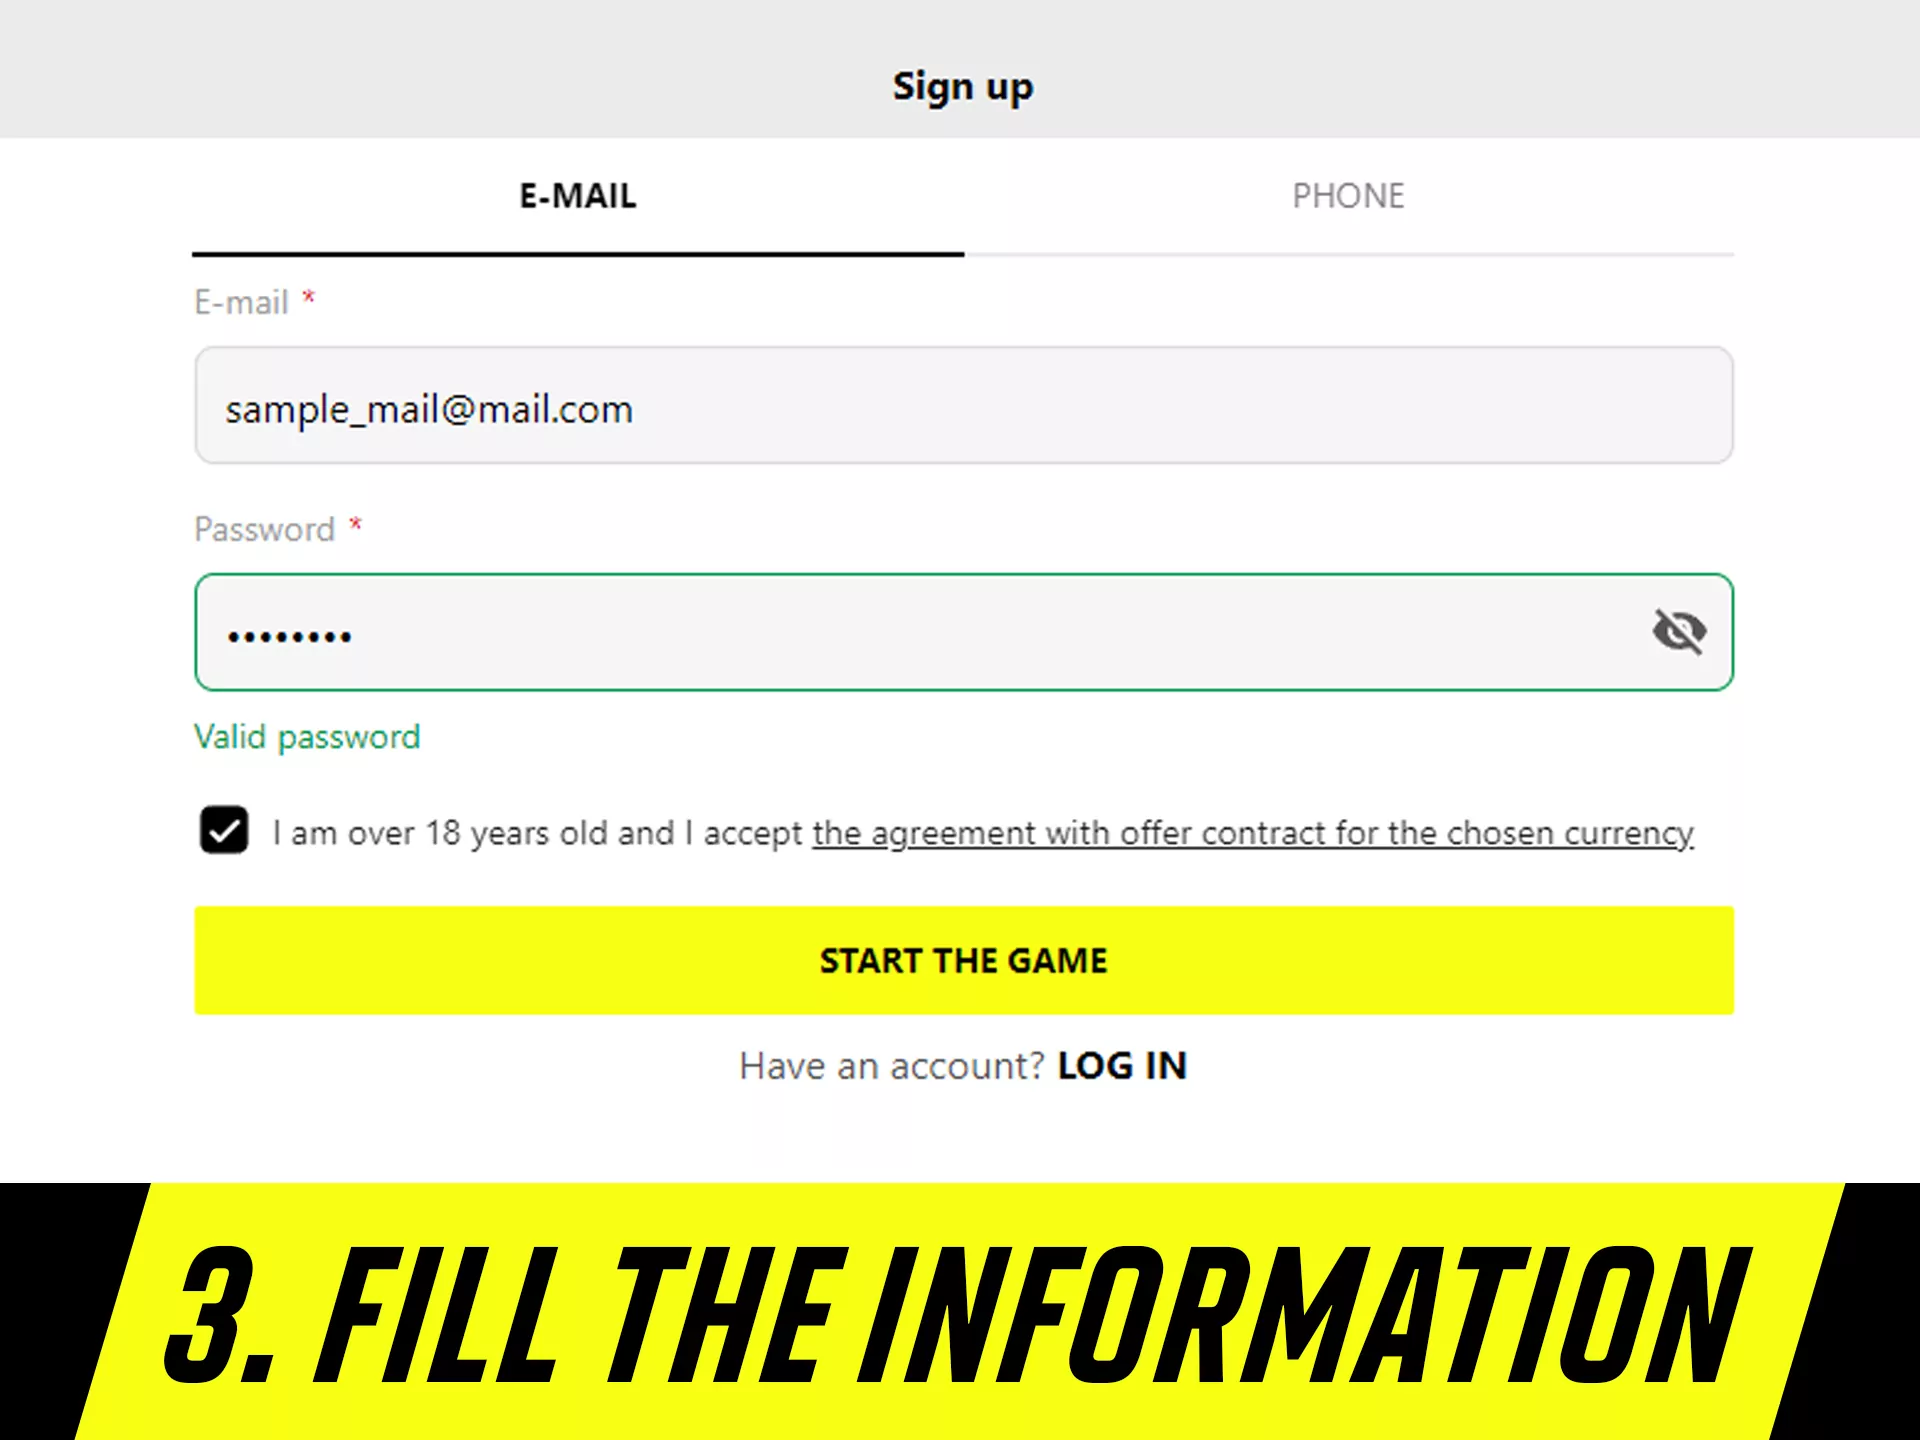 For proceed in registration you need to fill the infromation.